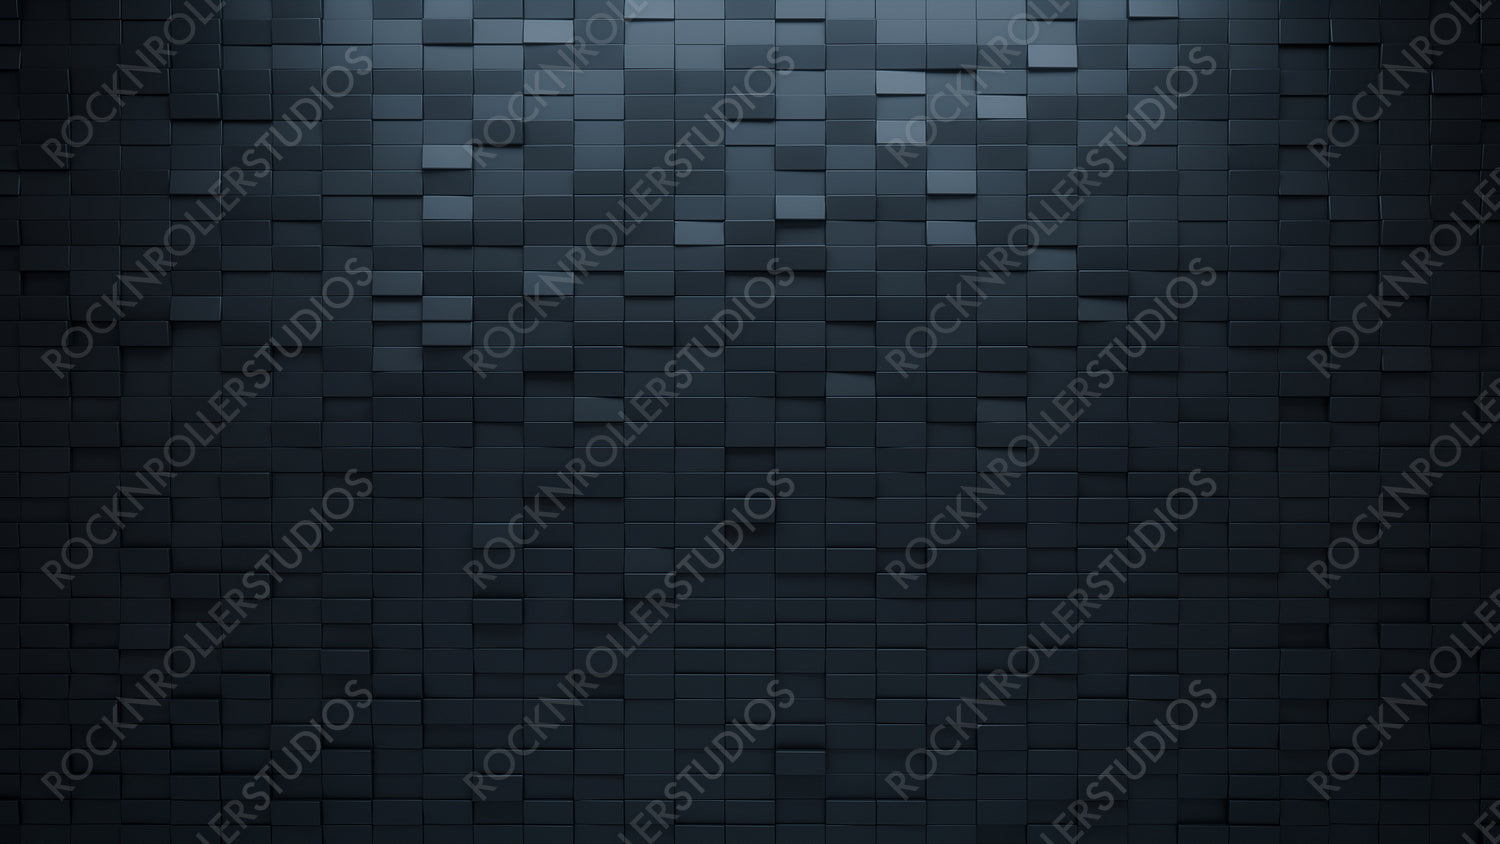 3D, Rectangular Mosaic Tiles arranged in the shape of a wall. Black, Semigloss, Bricks stacked to create a Polished block background. 3D Render